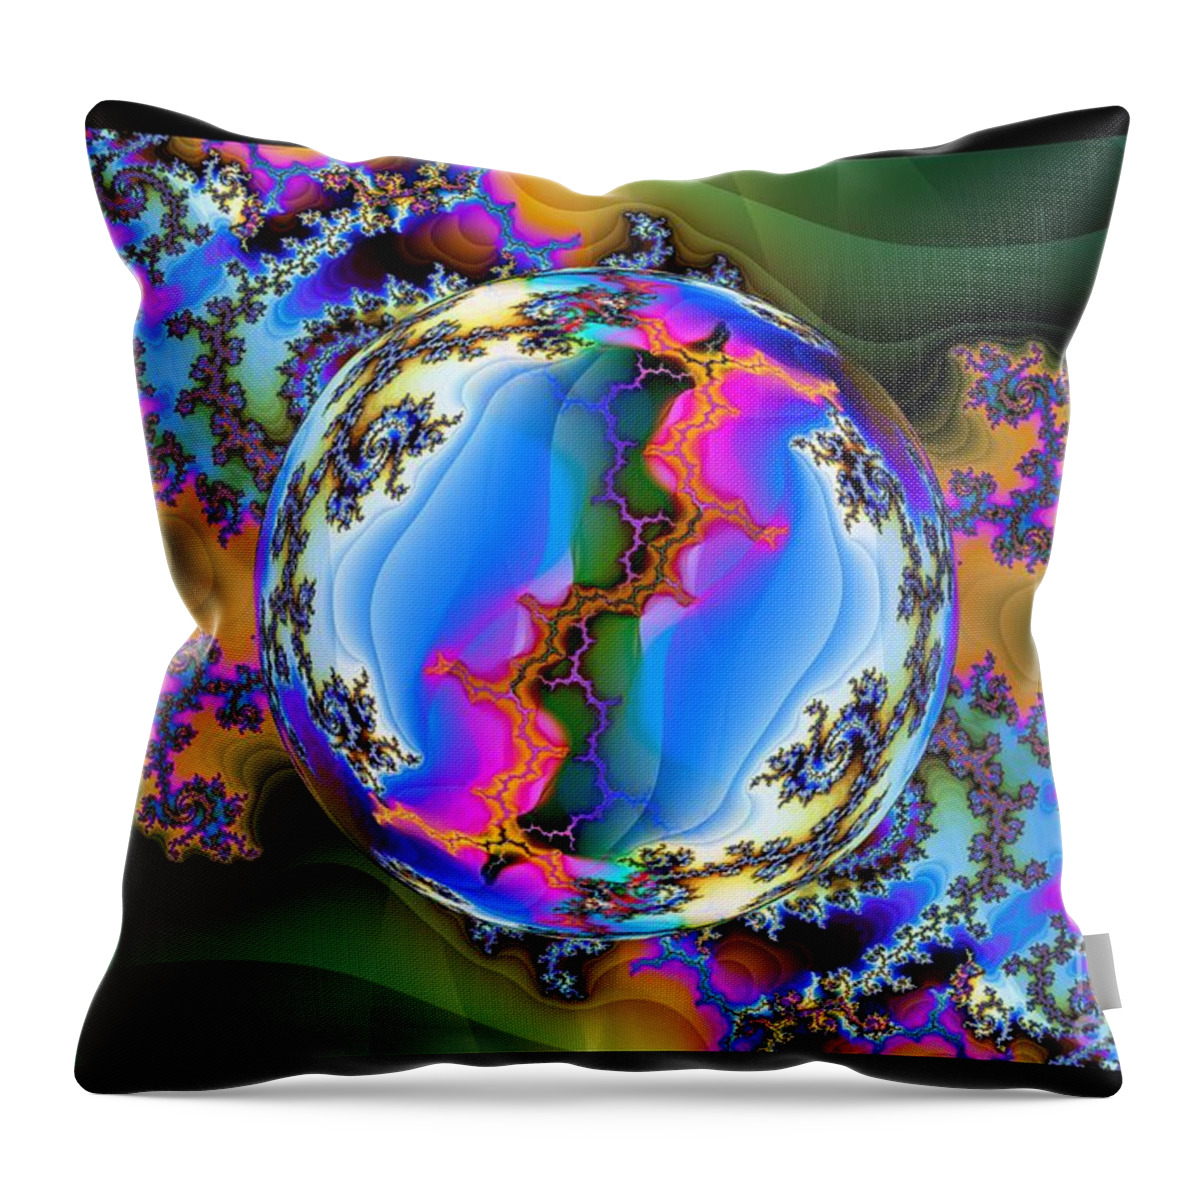 Global Fractalization Throw Pillow featuring the digital art Global Fractalization by Elizabeth McTaggart